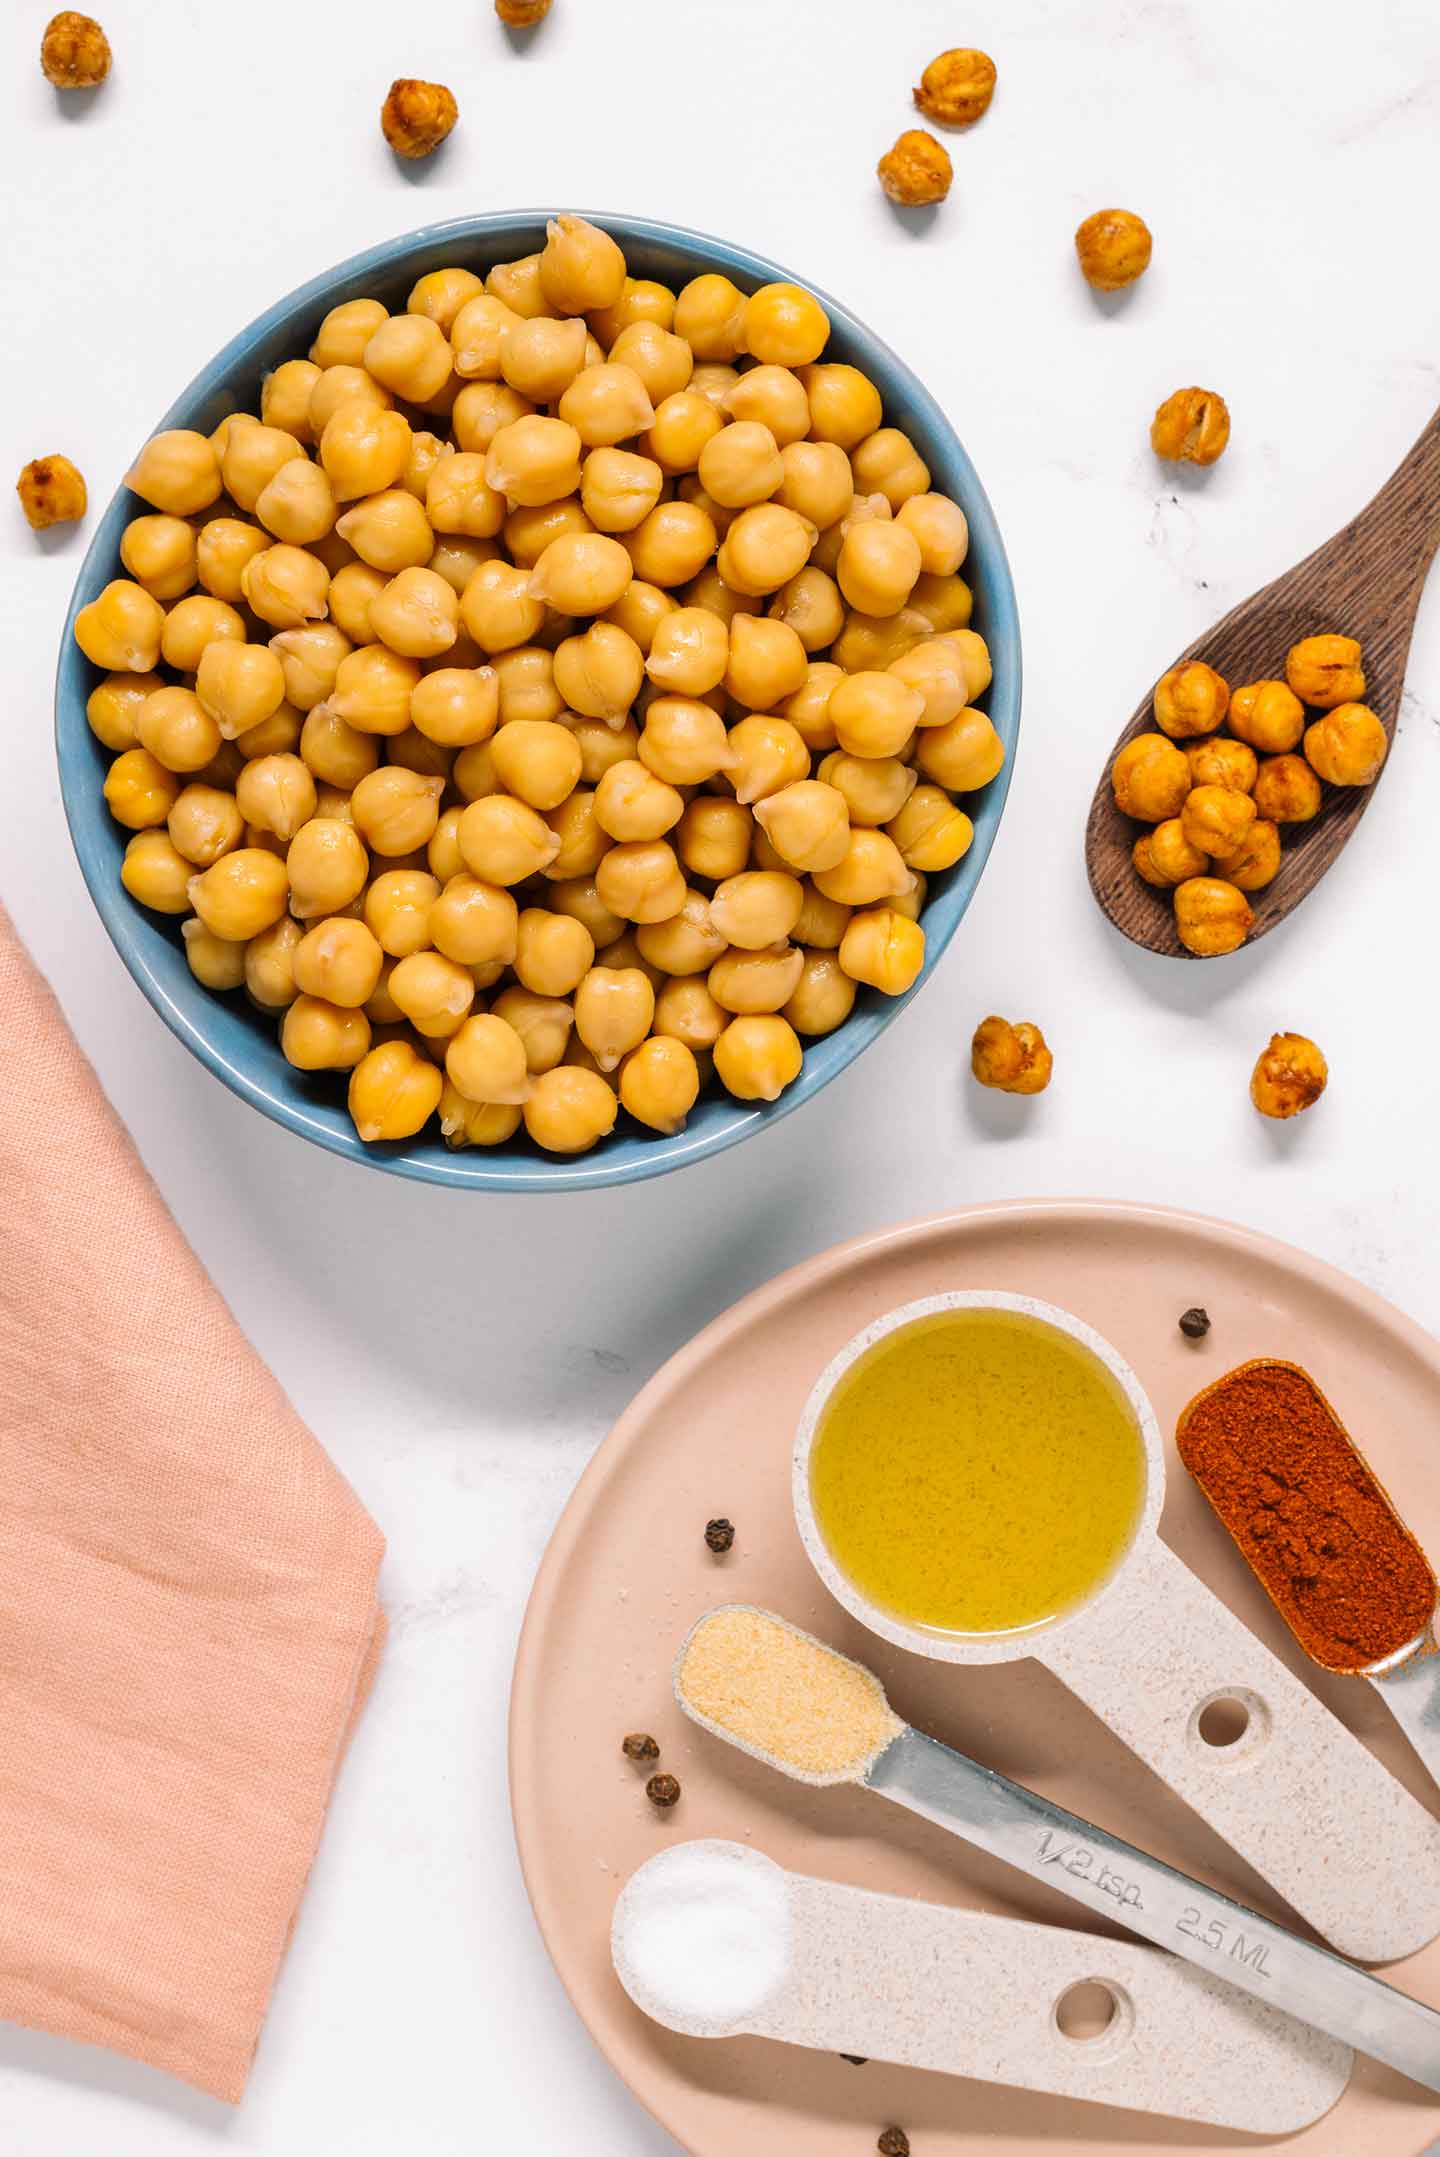 Top down view of ingredients for crunchy roasted chickpeas. The beans fill a small dish while seasonings are spread on a plate nearby.